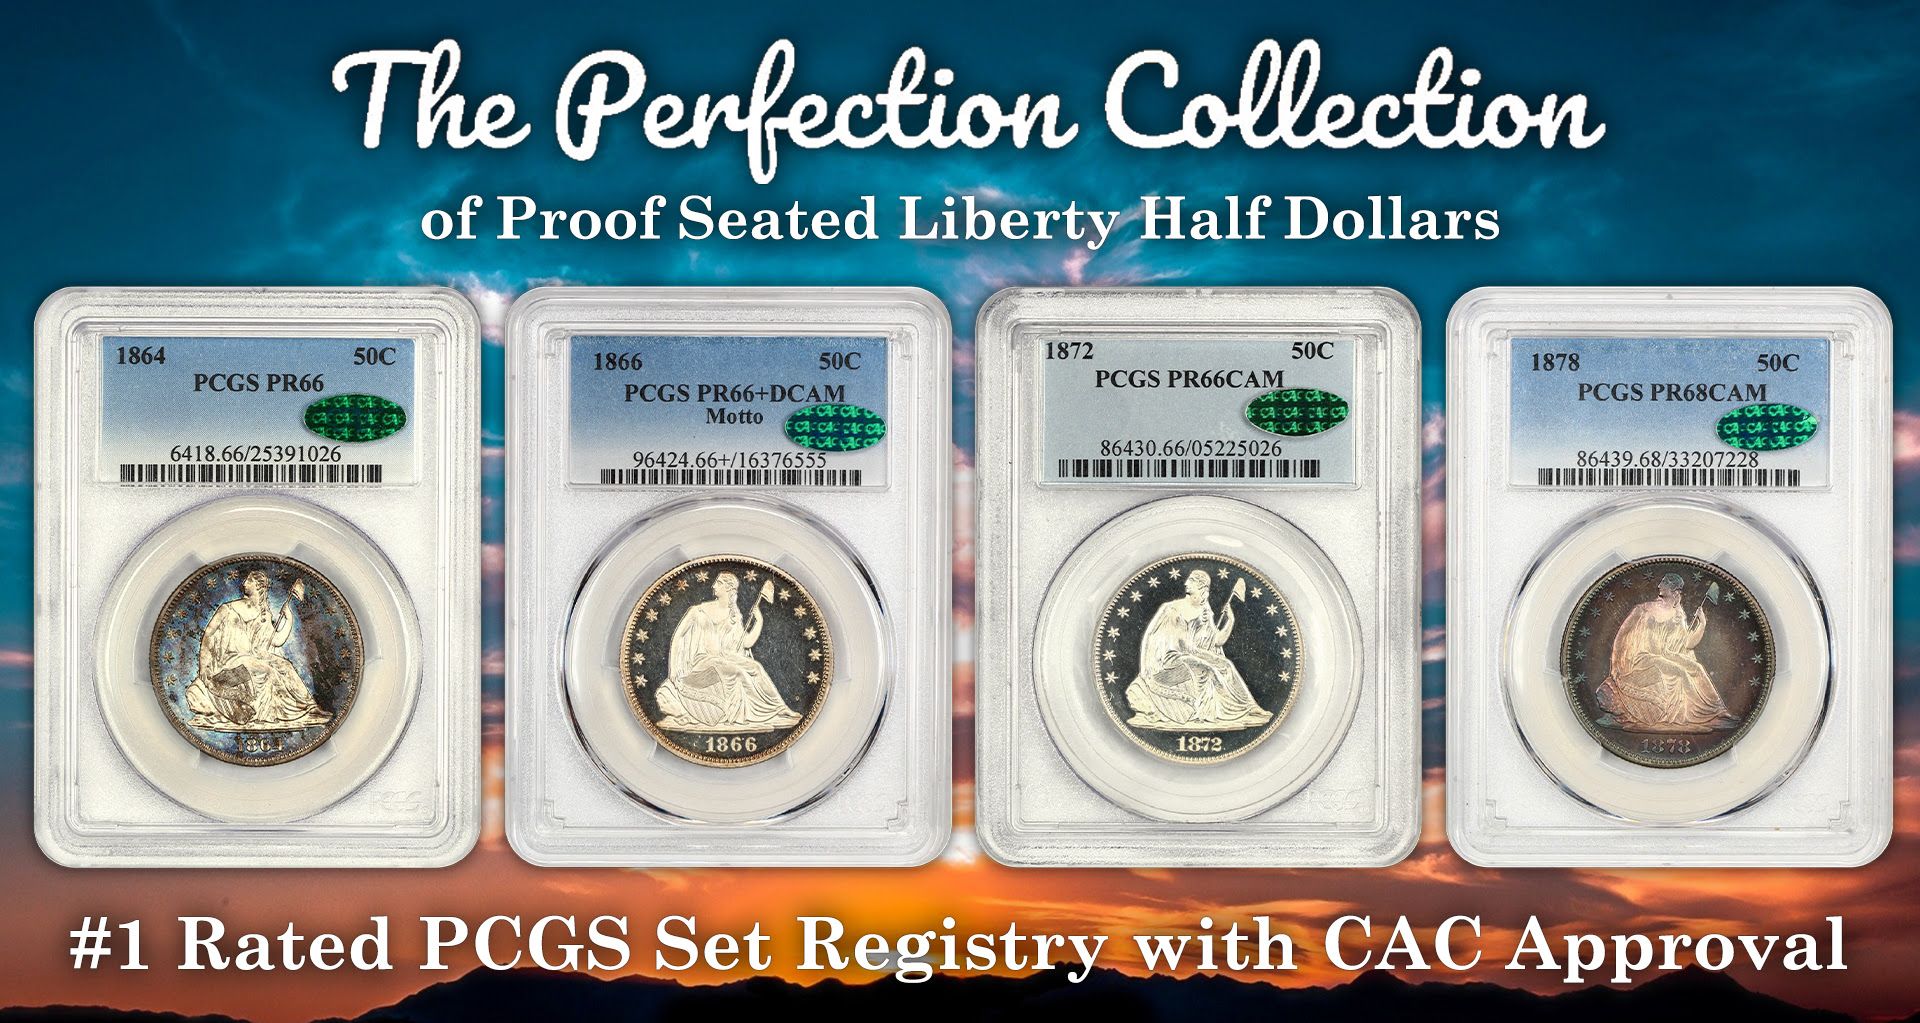 Seated Liberty Half Dollar Proofs & the Perfection Collection